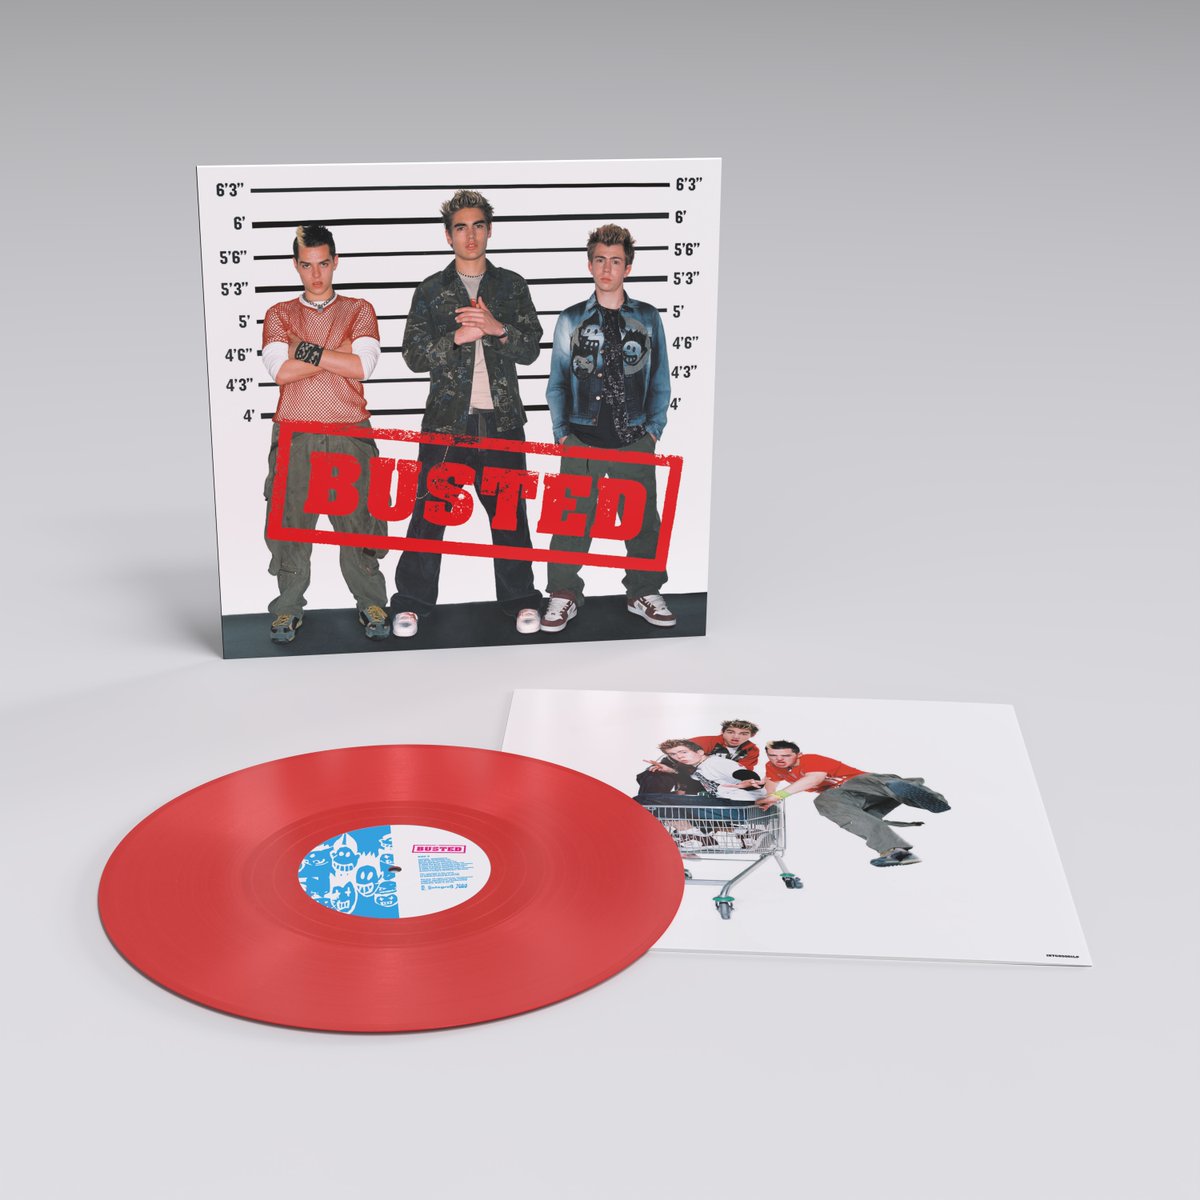 BUSTED REISSUES Only got a handful of each of these to offer for pre-order, so if you want one, act fast! When they are gone, they are gone! Pre-Order via Busted: vinyltap.co.uk/busted-0828704 A Present For Everyone: vinyltap.co.uk/a-present-for-…